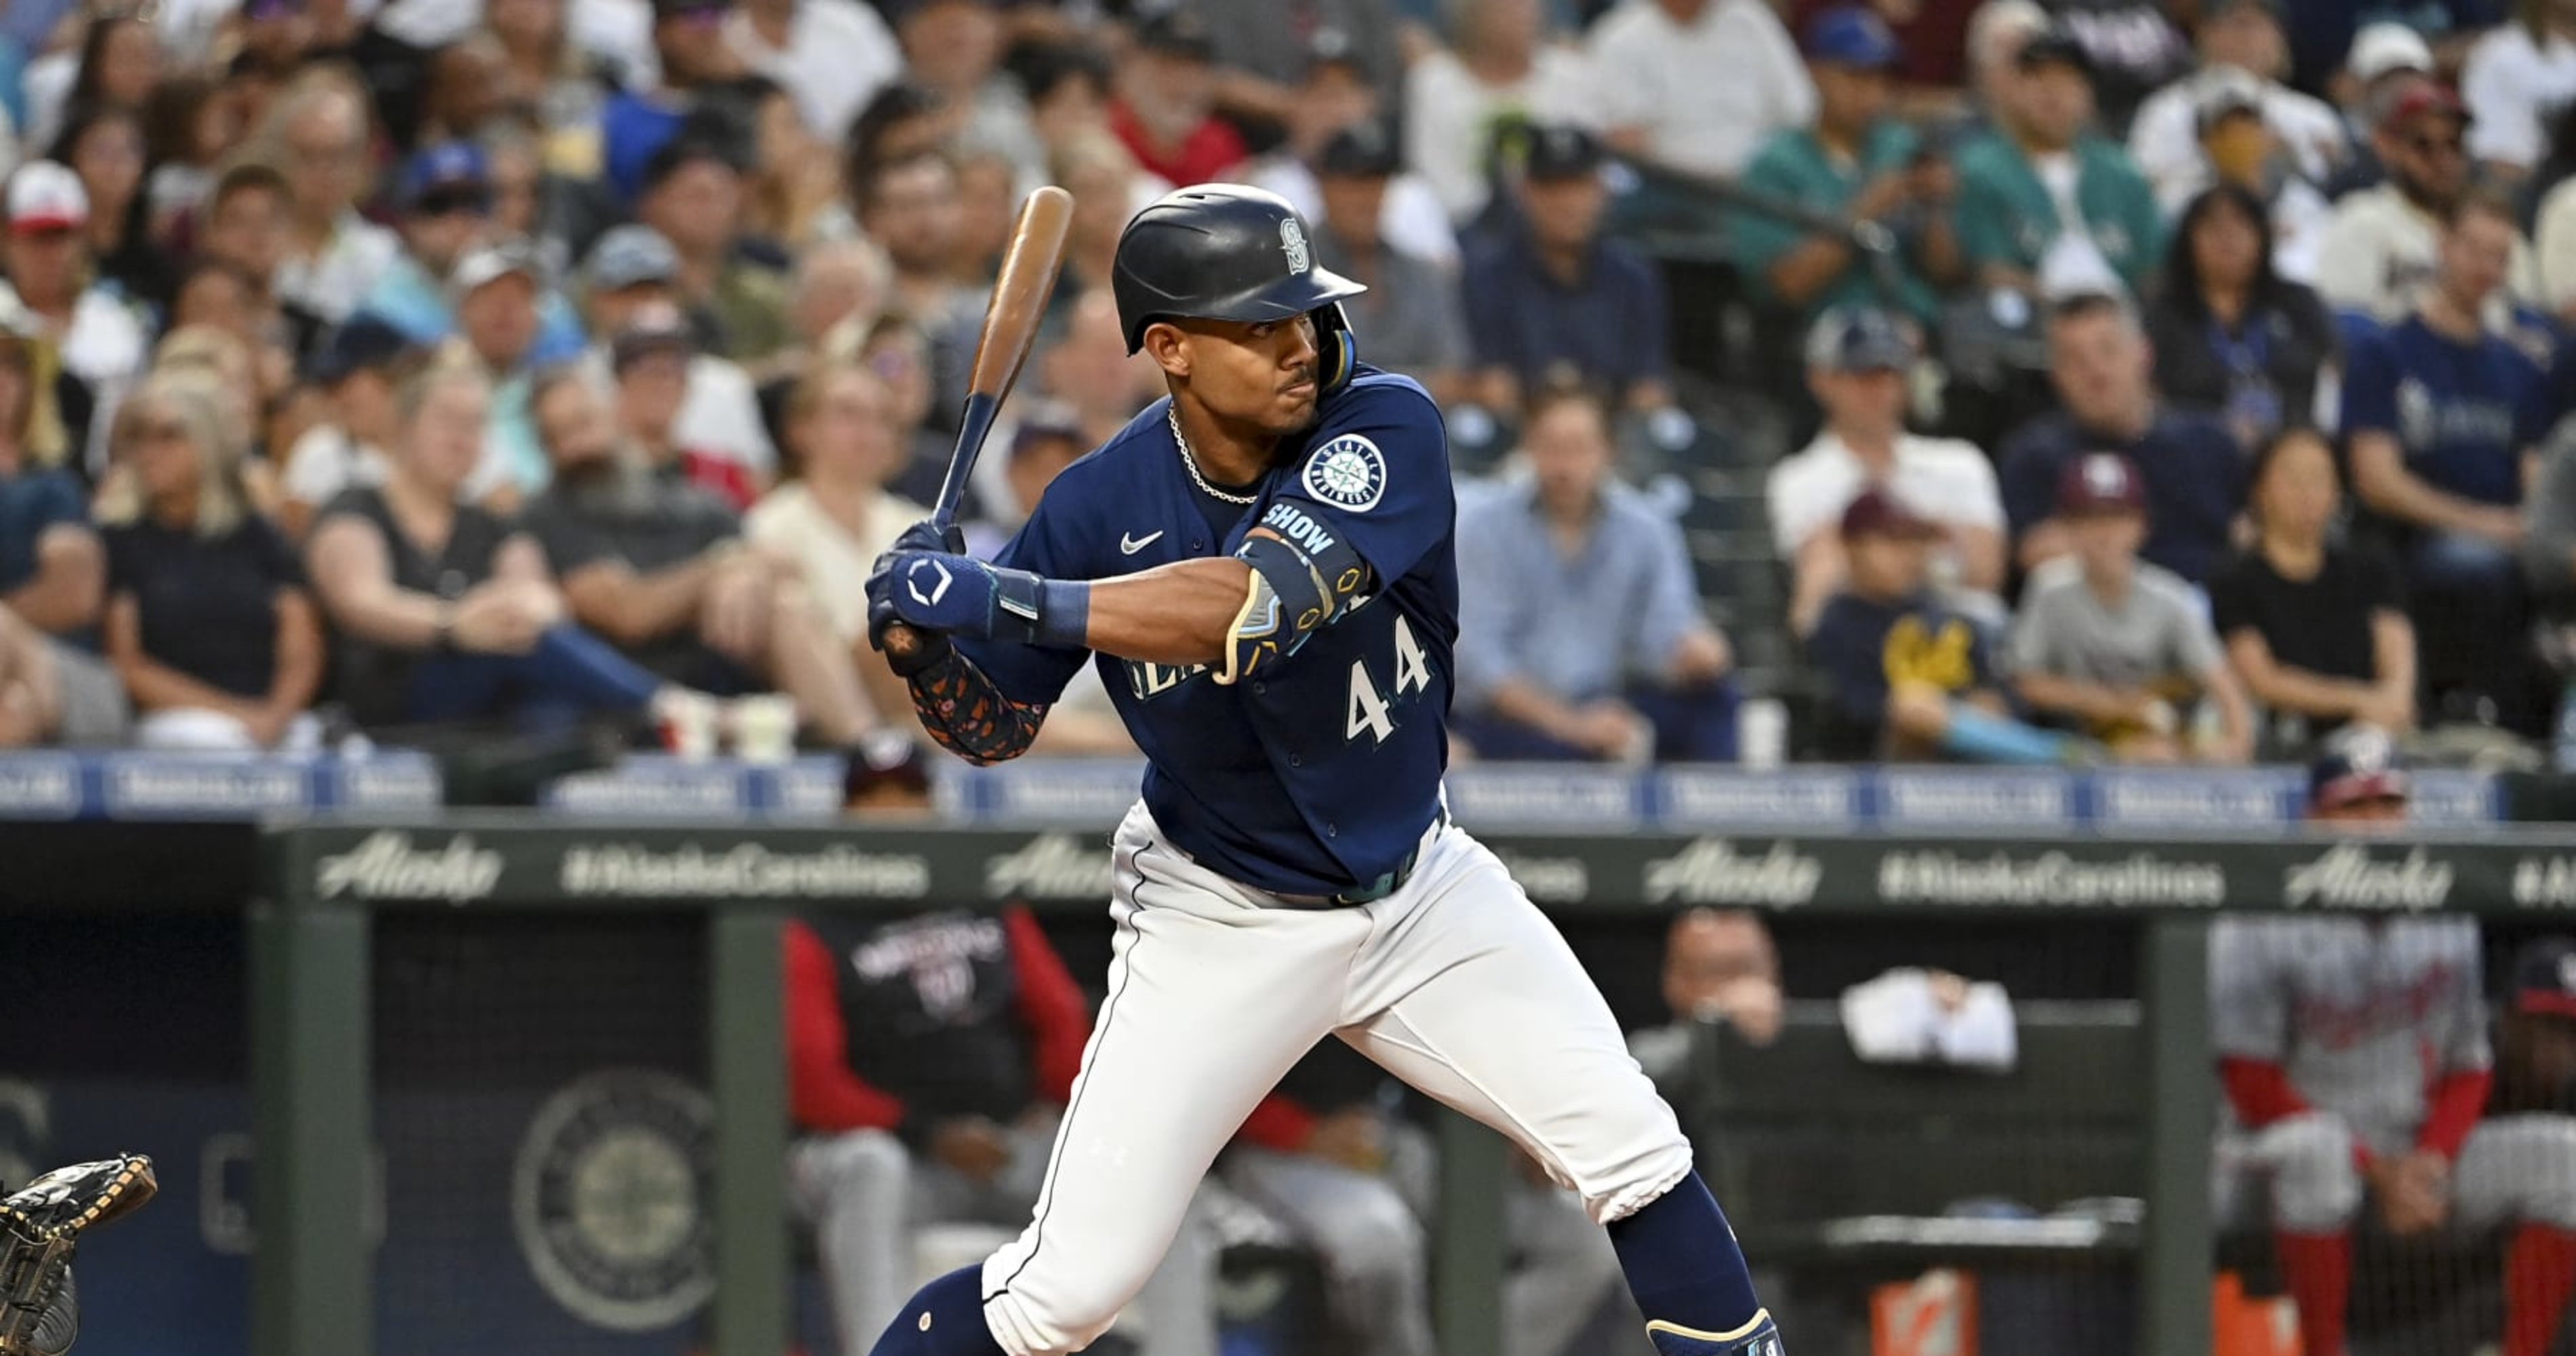 Report: Julio Rodríguez, Mariners Agree to $210M Contract; Could